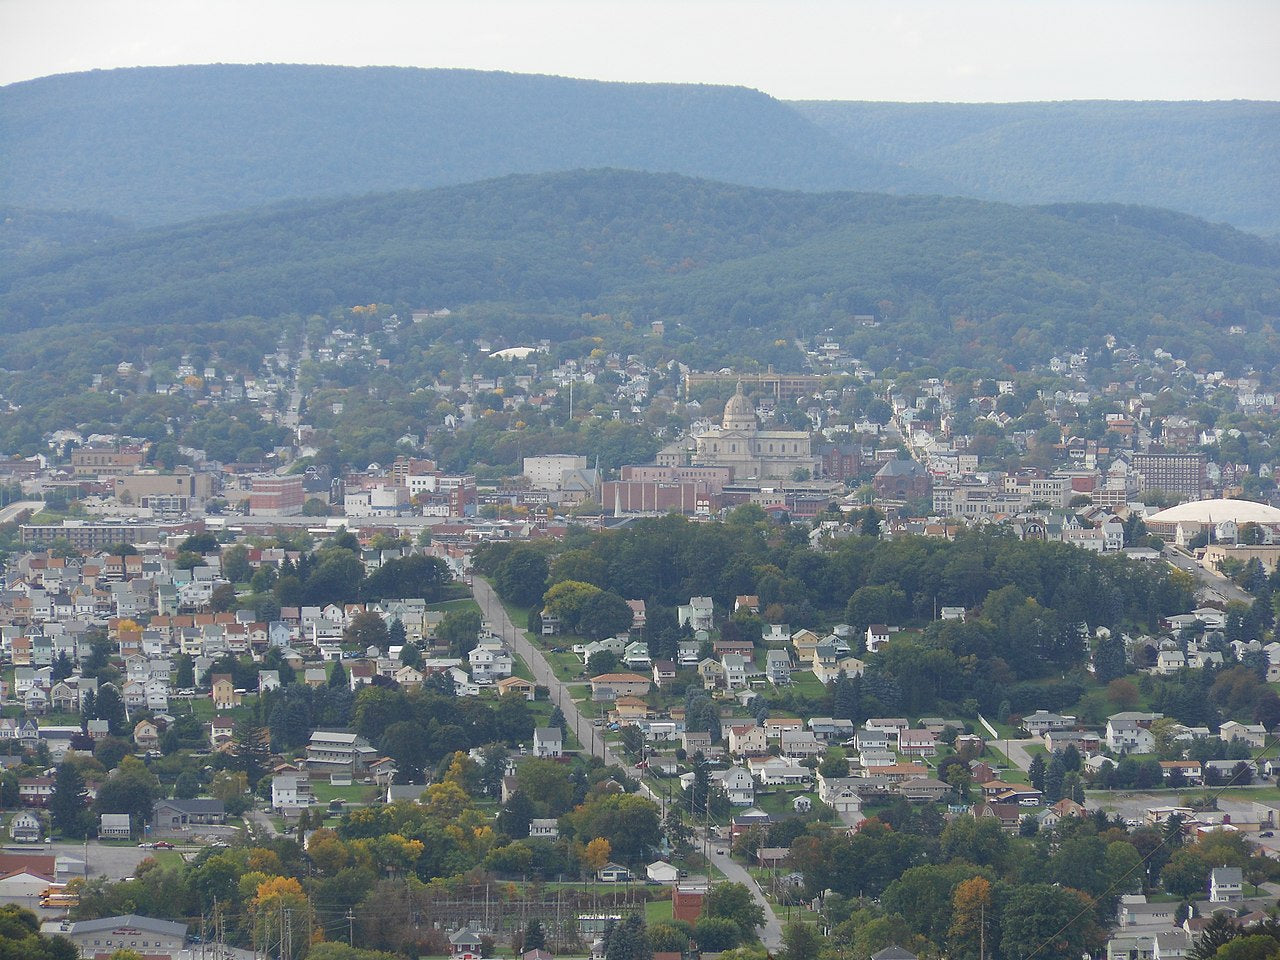 Haus and Hues in Altoona